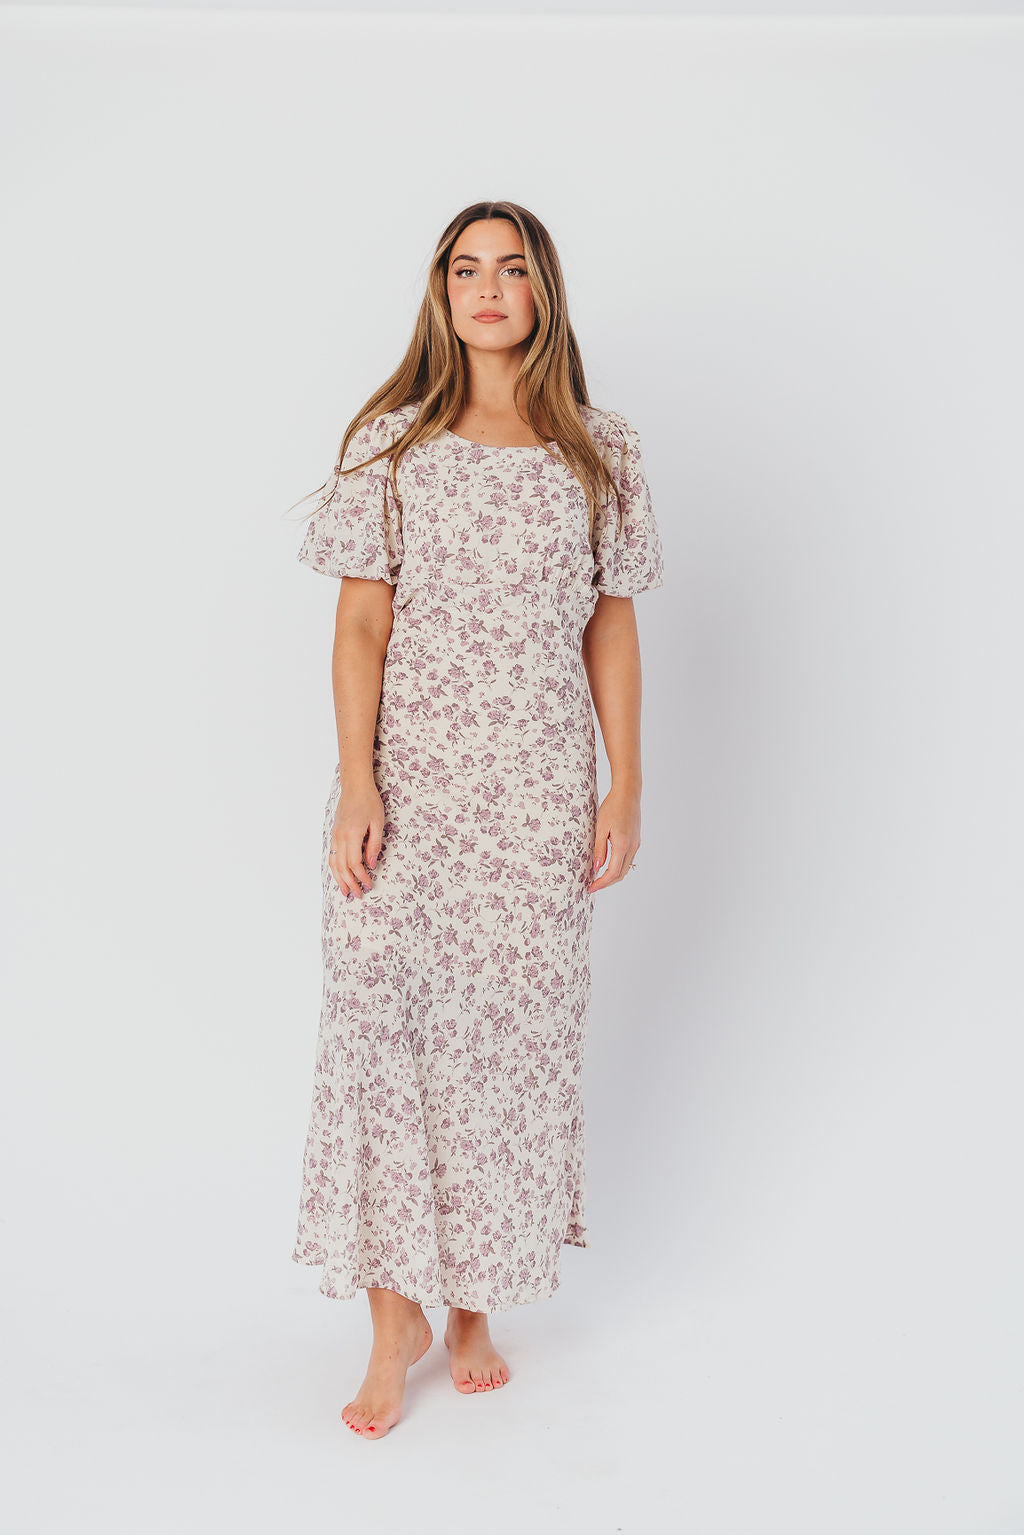 Lucia Bias-Cut Maxi Dress with Puffed Sleeves in Lilac Cream